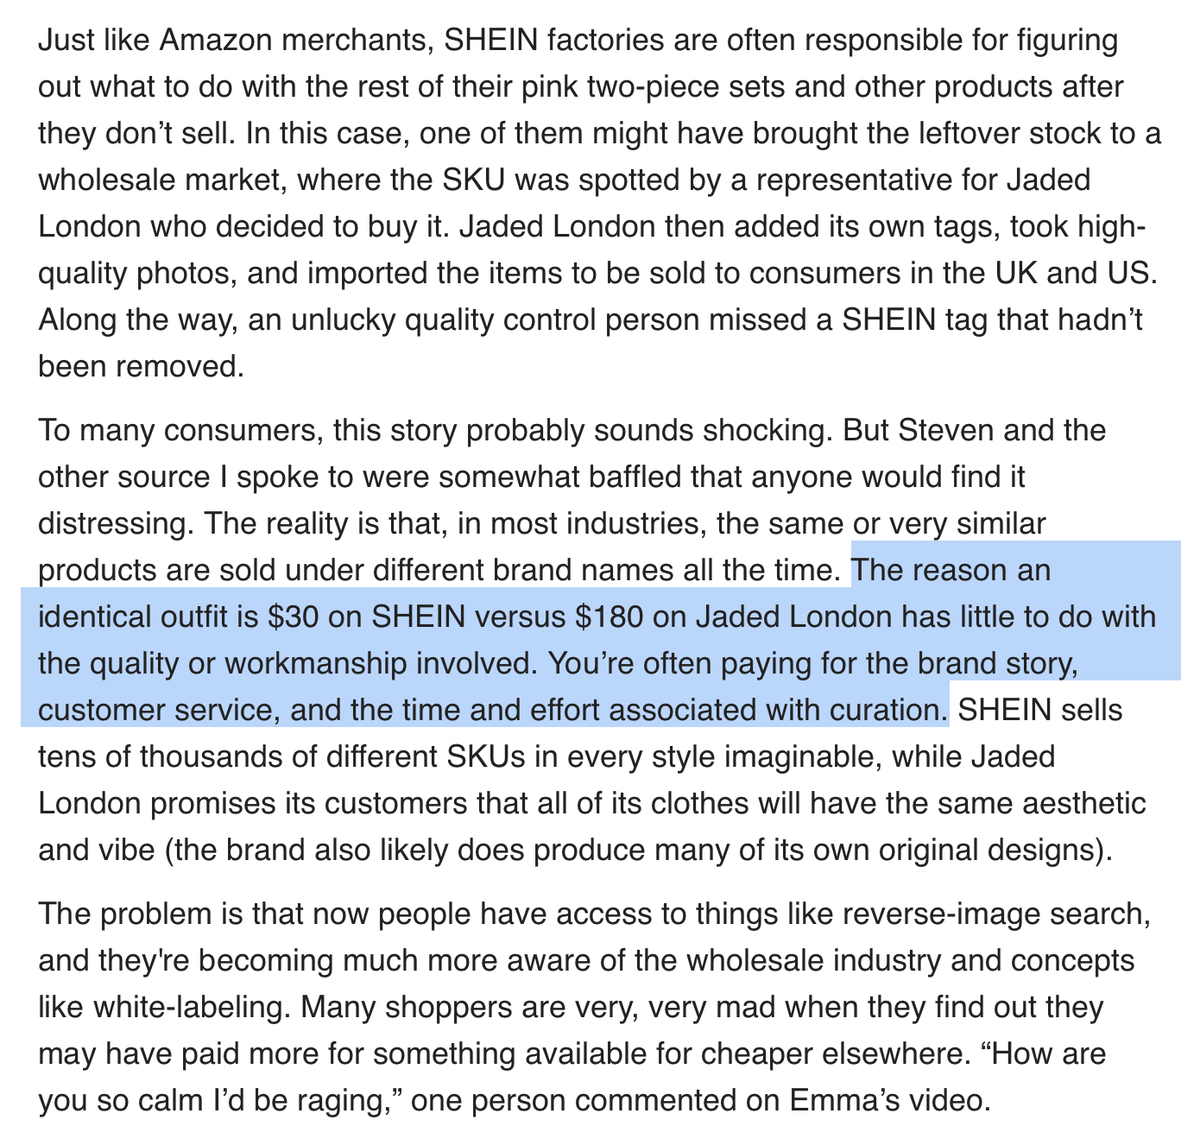 'The reason an identical outfit is $30 on SHEIN versus $180 on Jaded London has little to do with the quality or workmanship involved. You’re often paying for the brand story, customer service, and the time and effort associated with curation.'